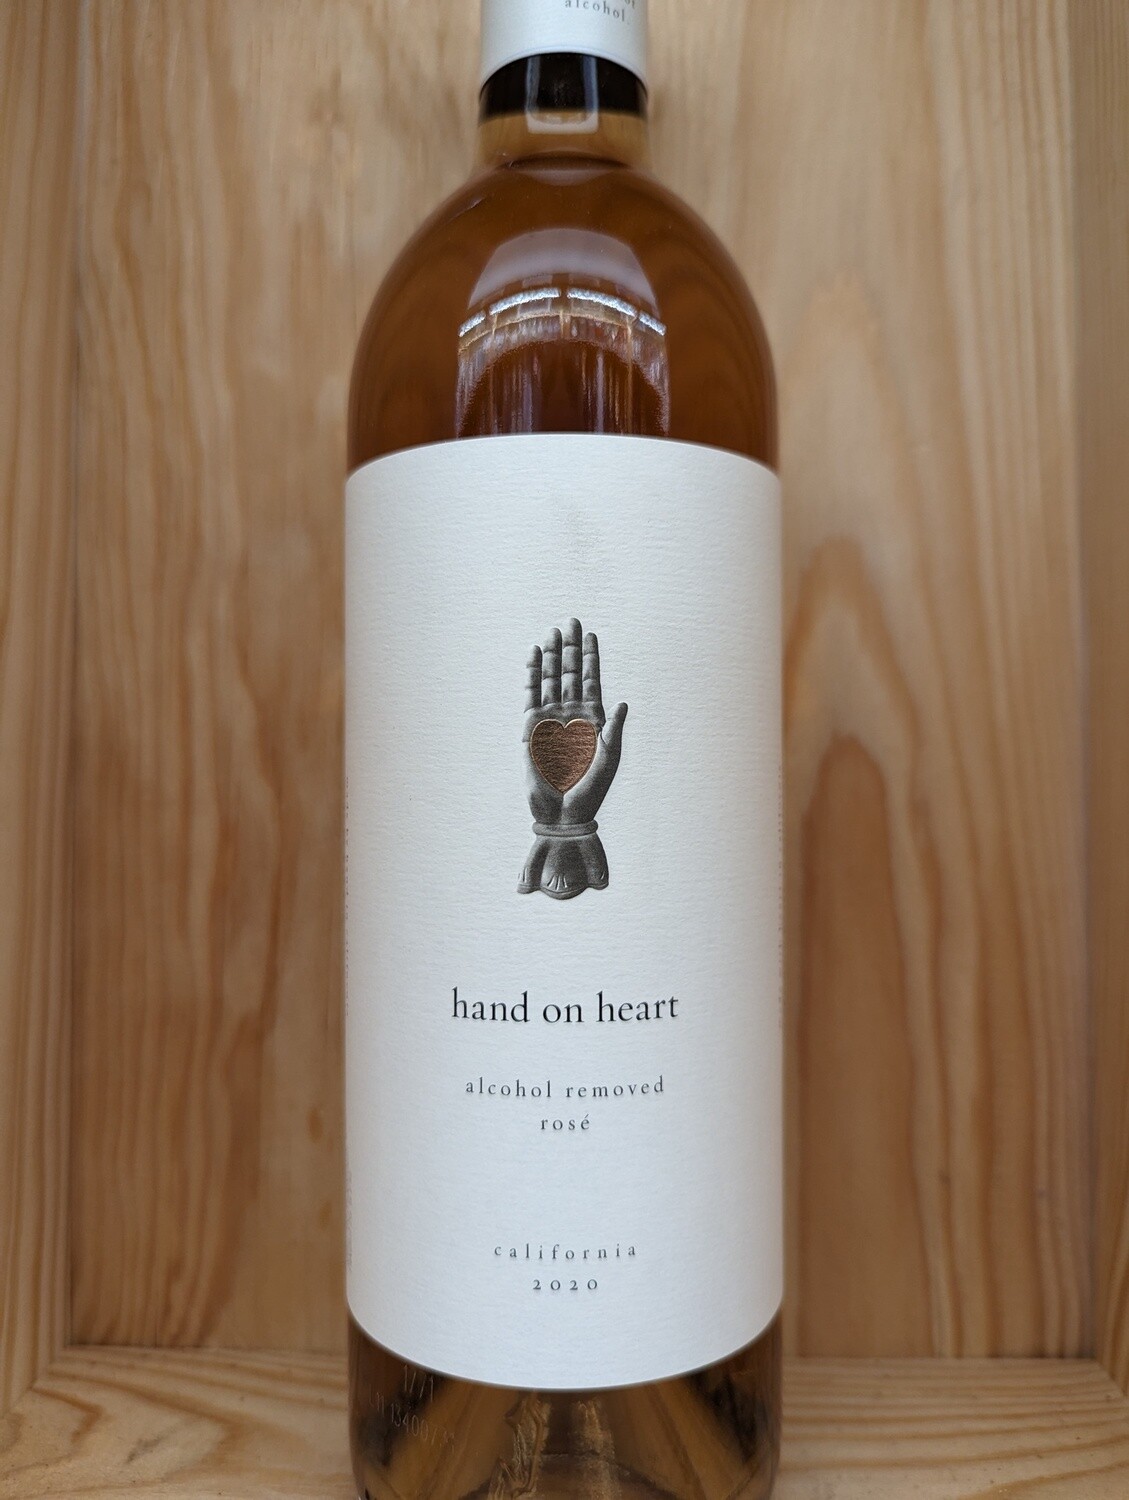 HAND ON HEART NON-ALCOHOLIC ROSE